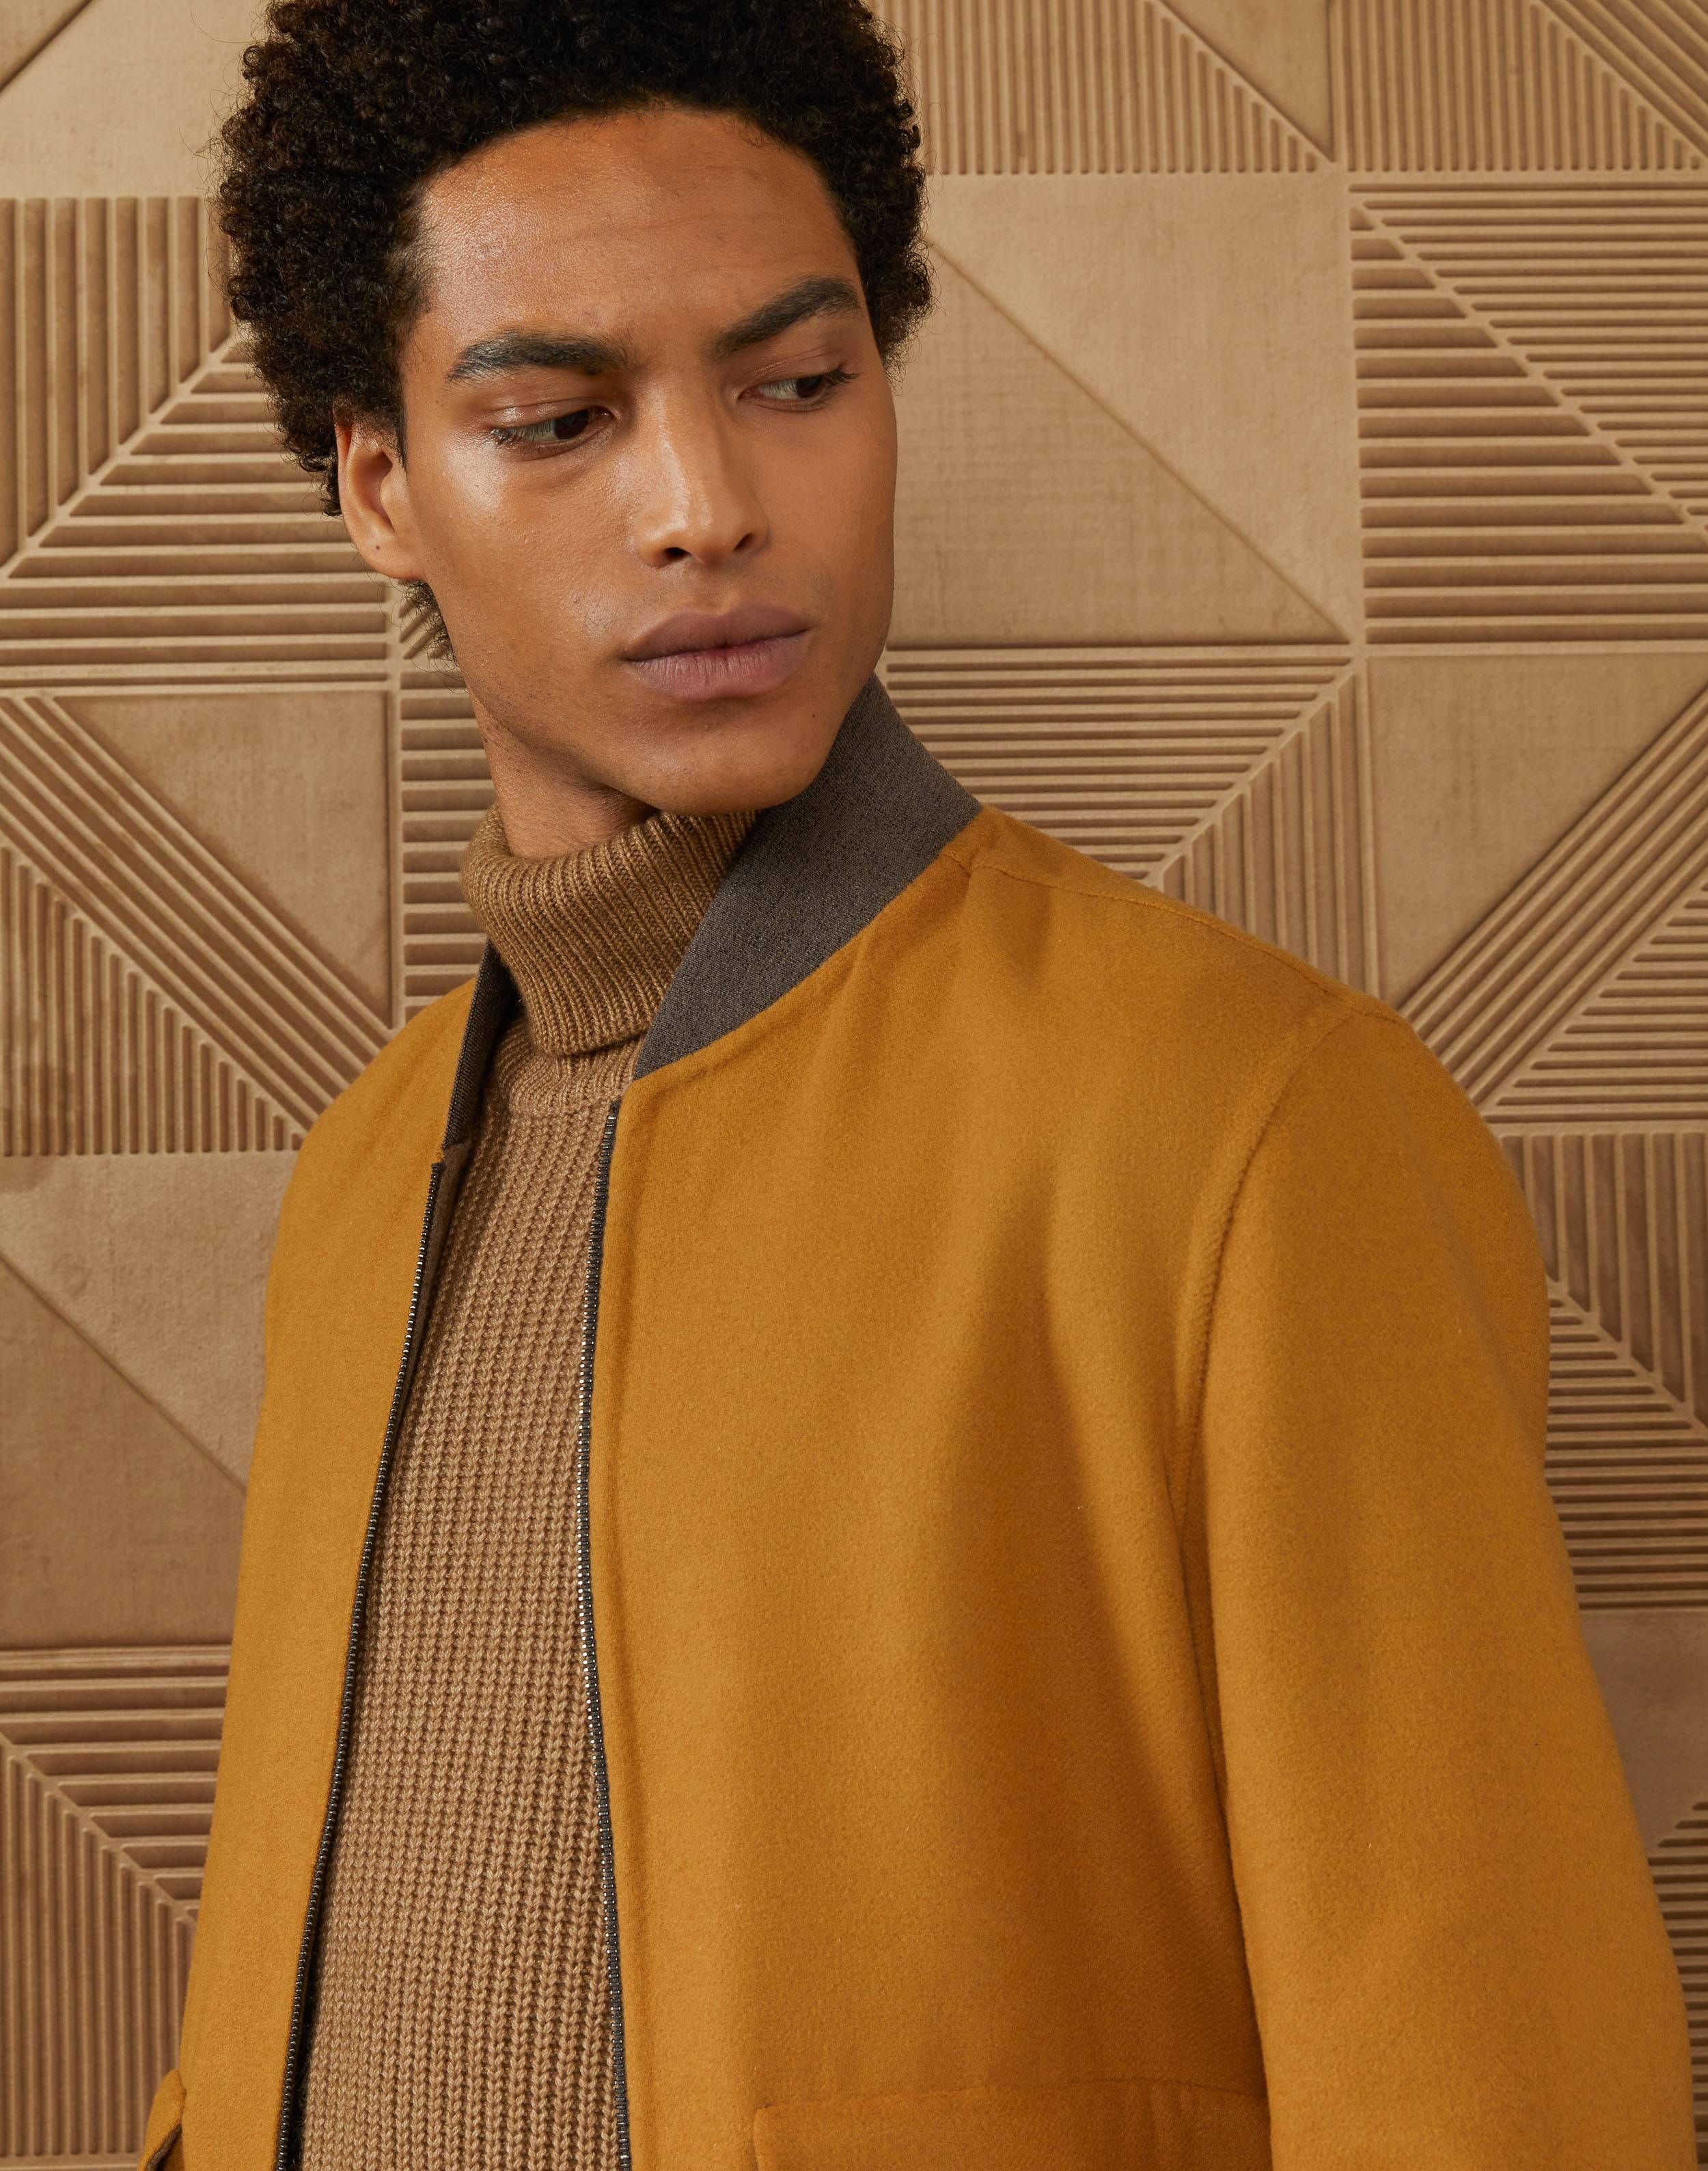 Double-face beige-and-mustard jacket in wool, cashmere and silk